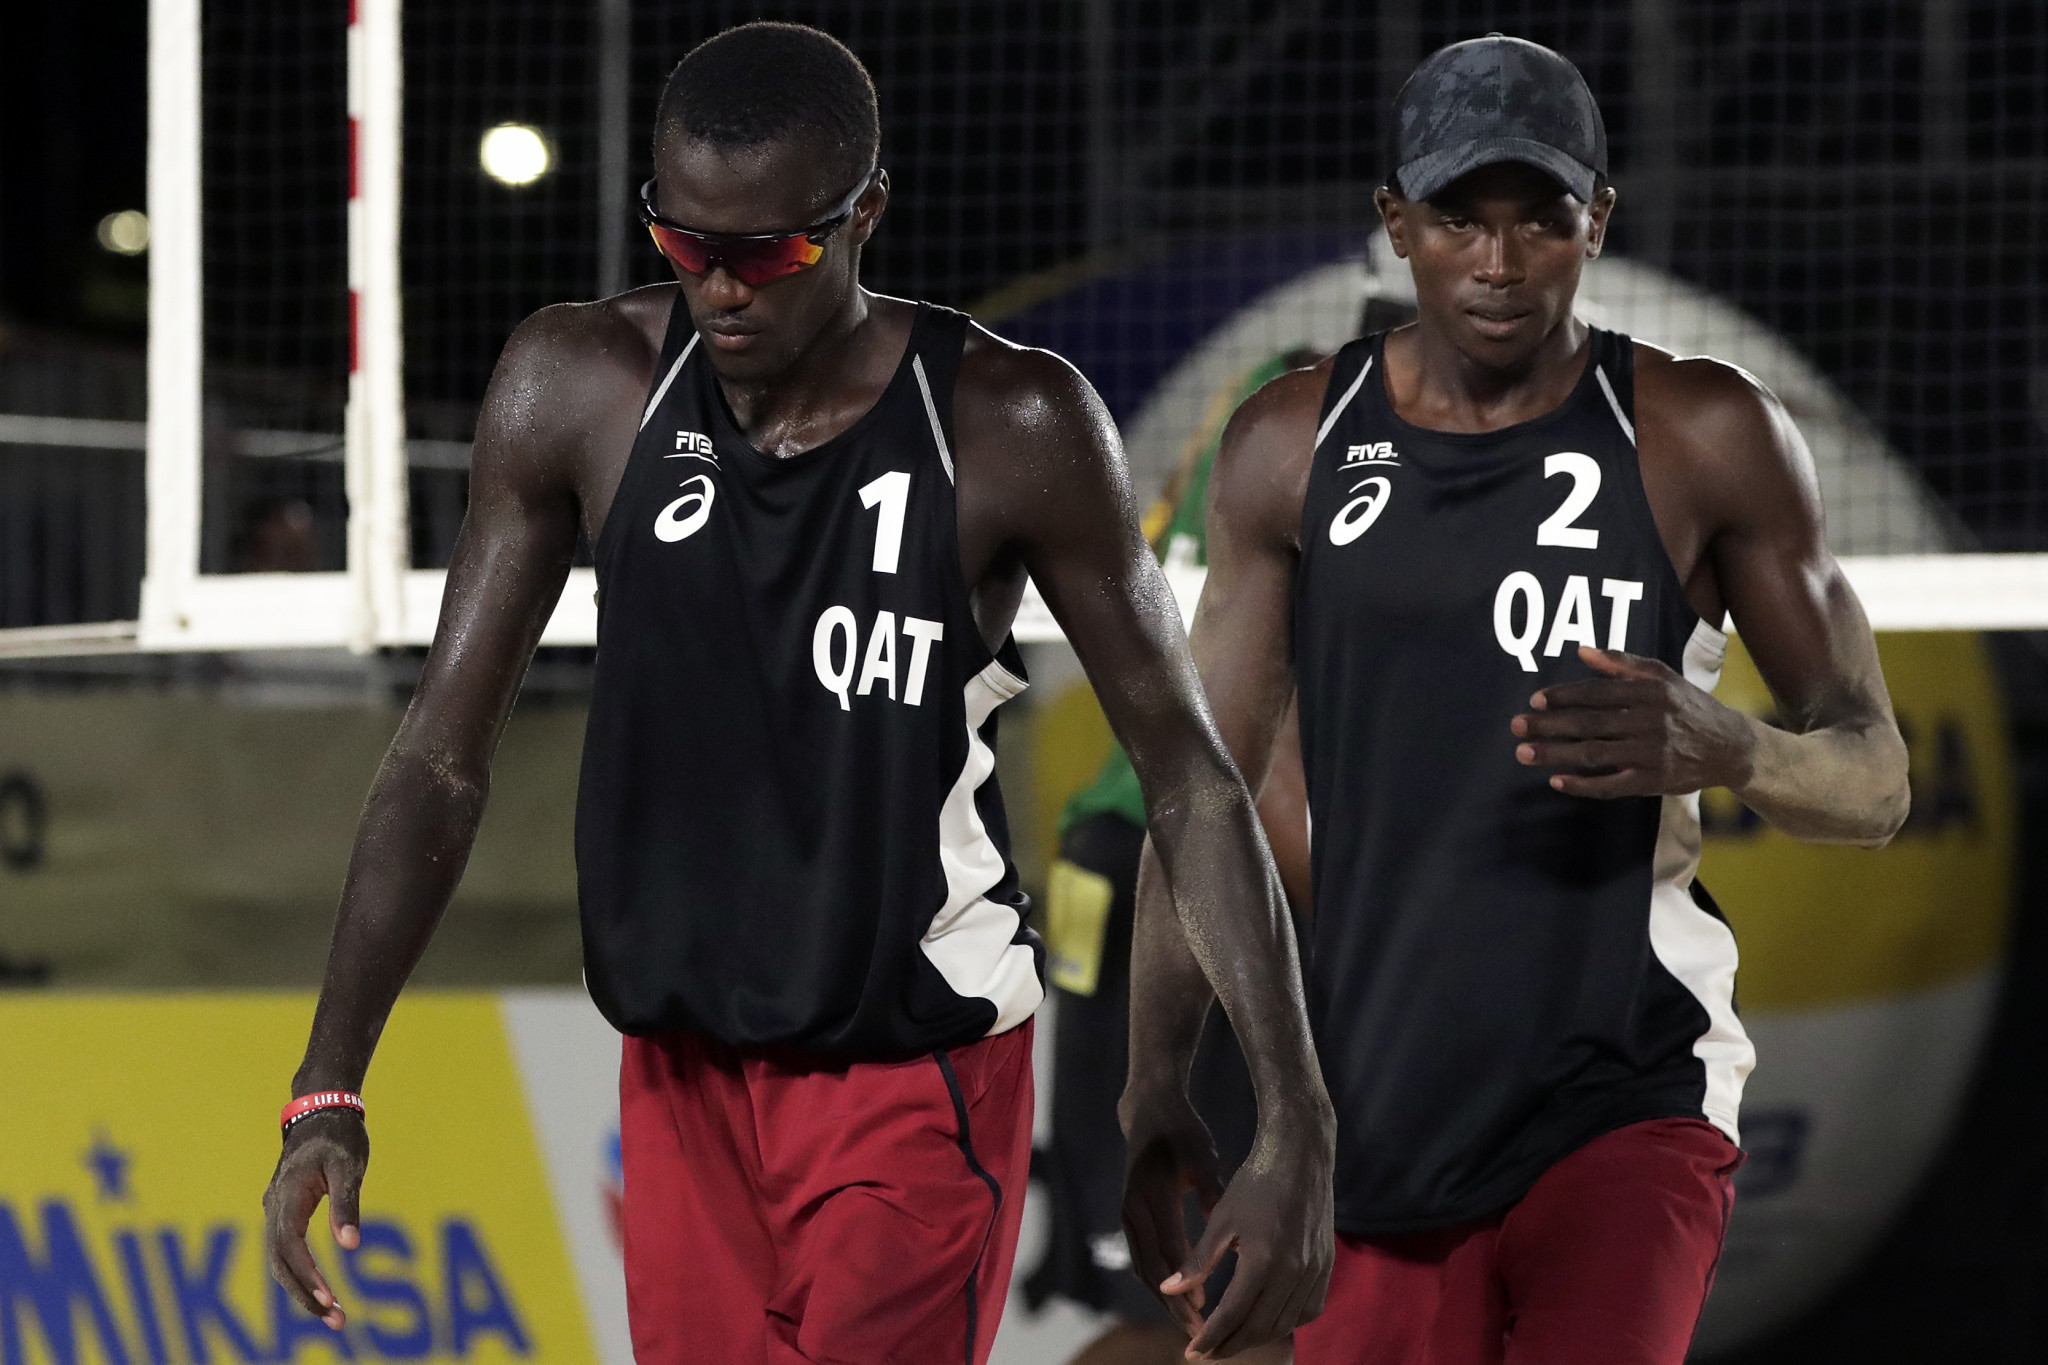 Qatar Beach Volleyball Team Ranked 2nd in Olympics Classification